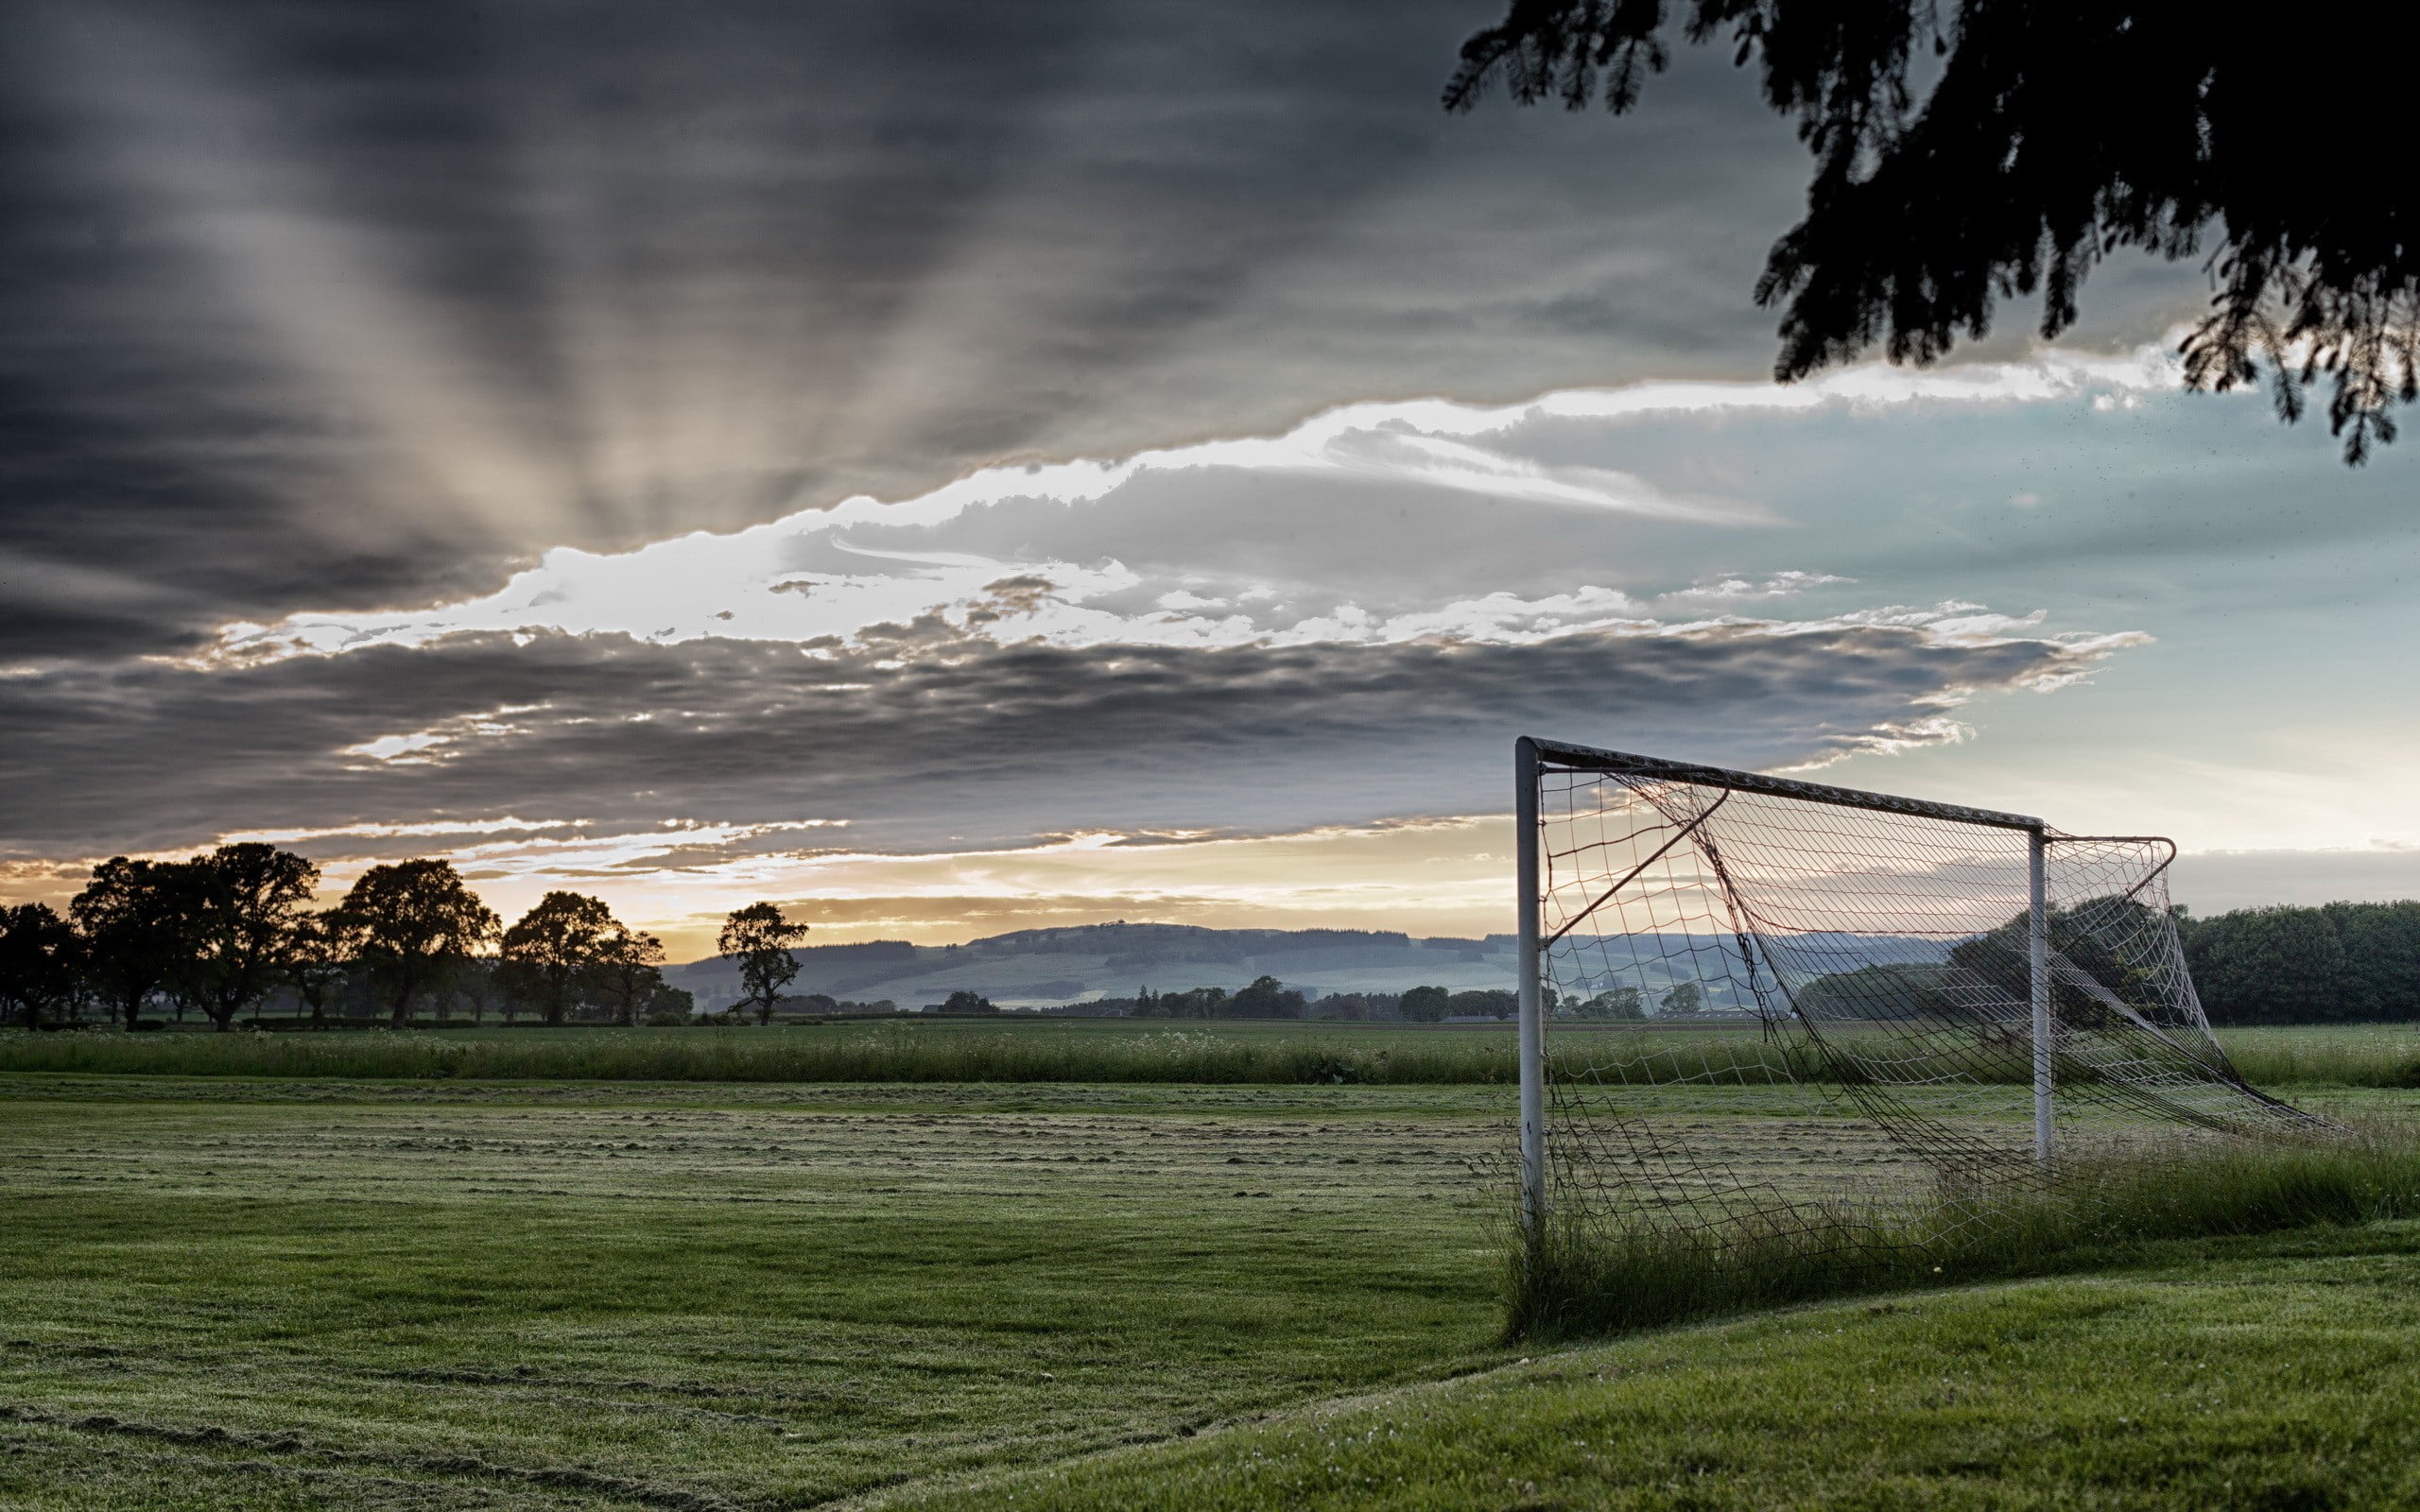 white goal net, Goal, clouds, soccer pitches, sky